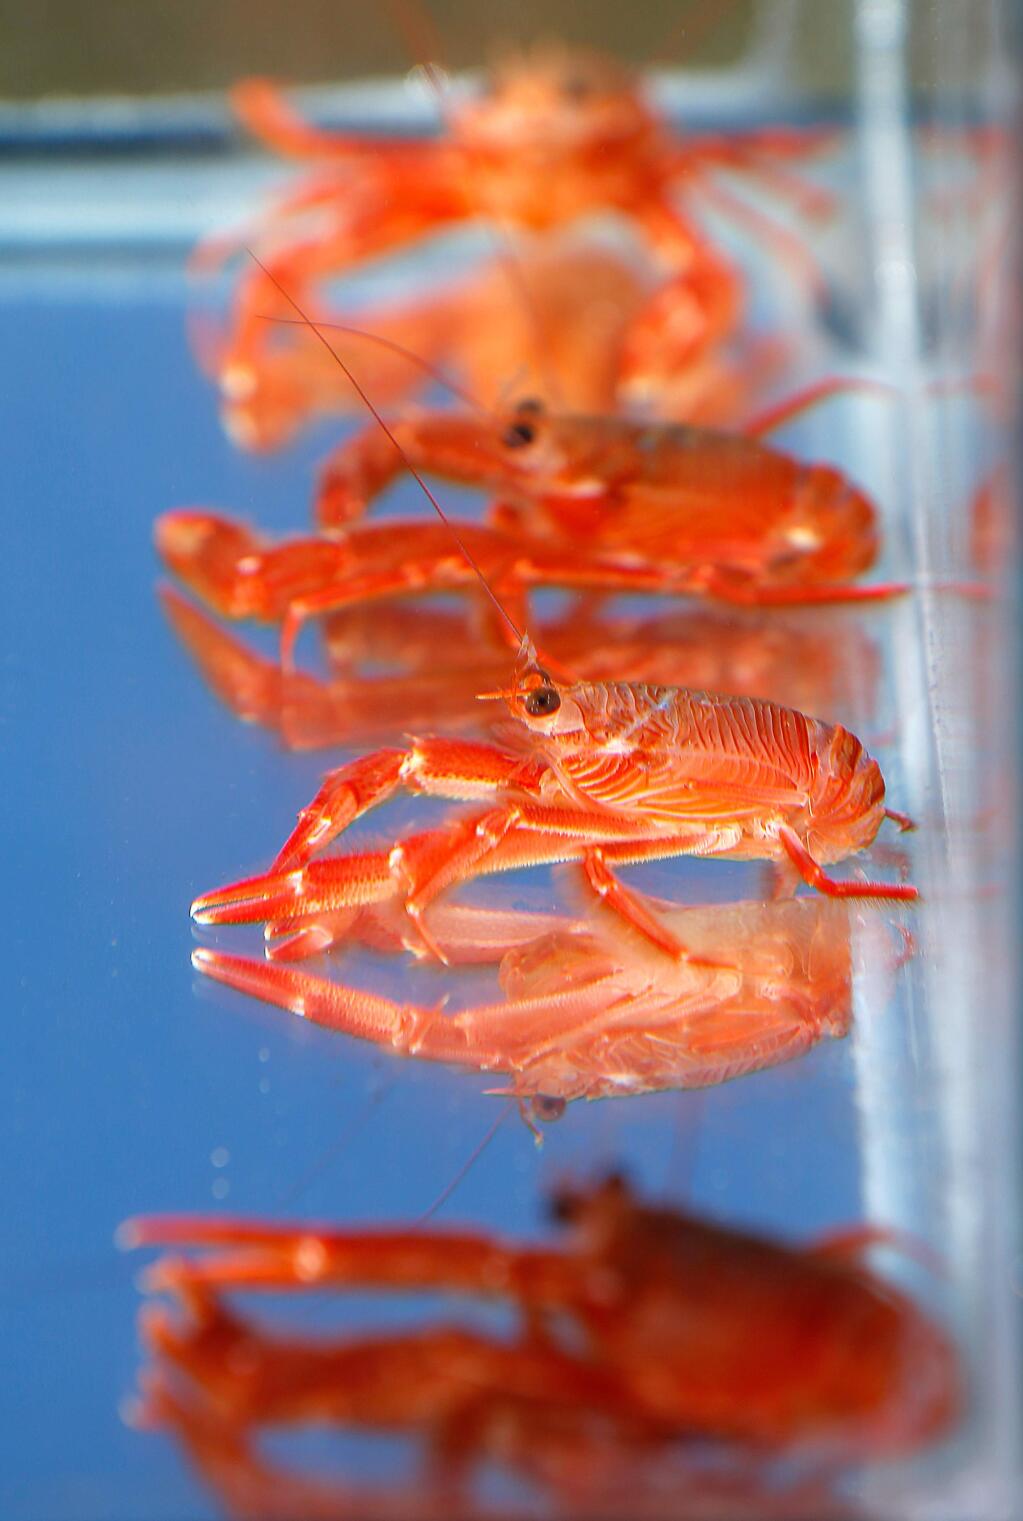 A group of pelagic red crabs found washed ashore at Salmon Creek Beach by scientists are displayed at UC Davis Bodega Marine Laboratory in Bodega Bay, California on Friday, January 27, 2017. The crabs, which are normally found in waters around central and southern Baja California, were carried north by unusually warm ocean currents. (Alvin Jornada / The Press Democrat)